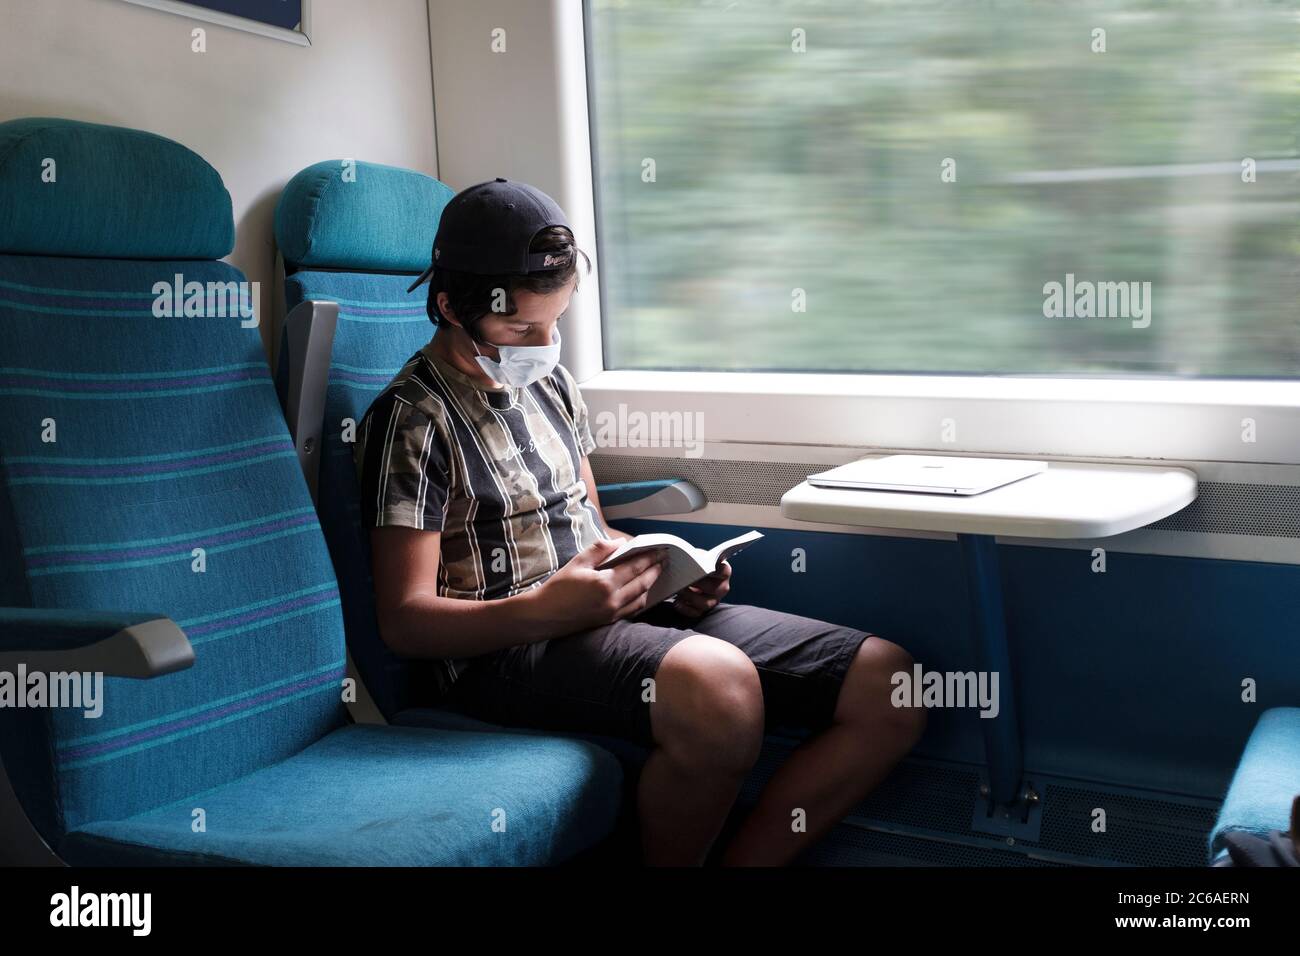 Boy reads book on commuters  train wearing face mask during  Covid-19 pandemic lockdown, London, UK Stock Photo